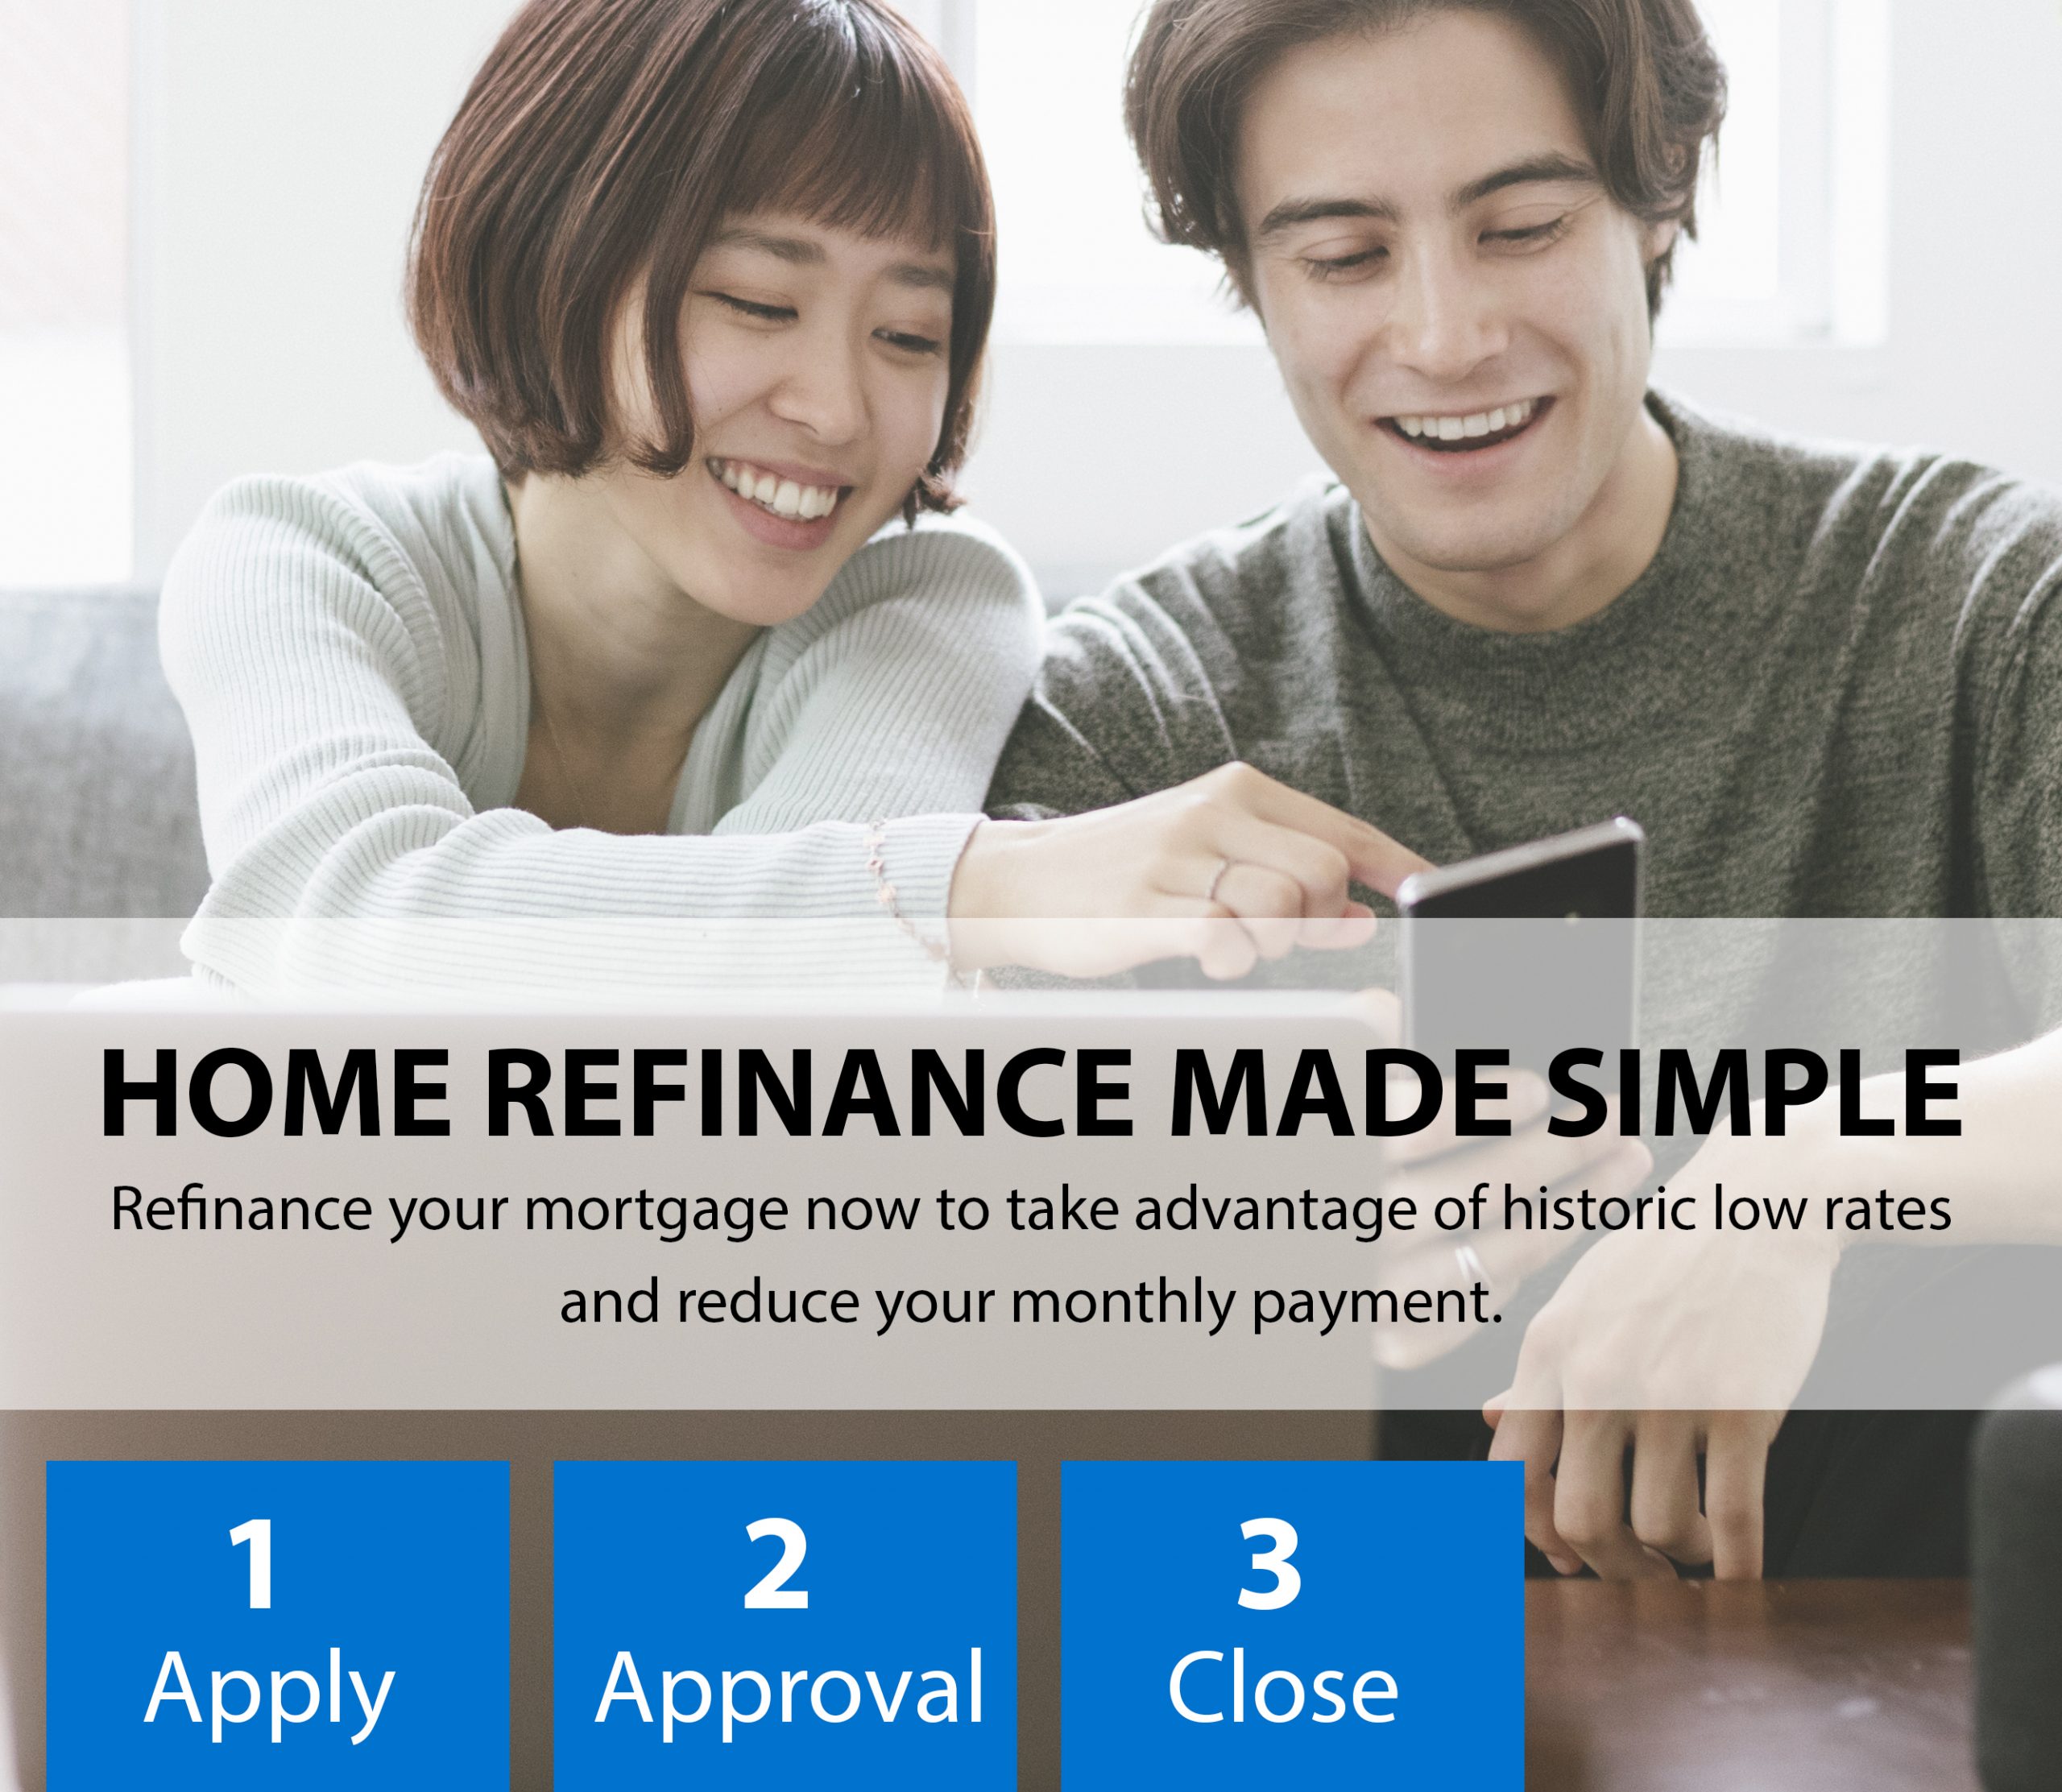 HOME REFINANCE MADE SIMPLE Refinance your mortgage now to take advantage of historic low rates and reduce your monthly payment.